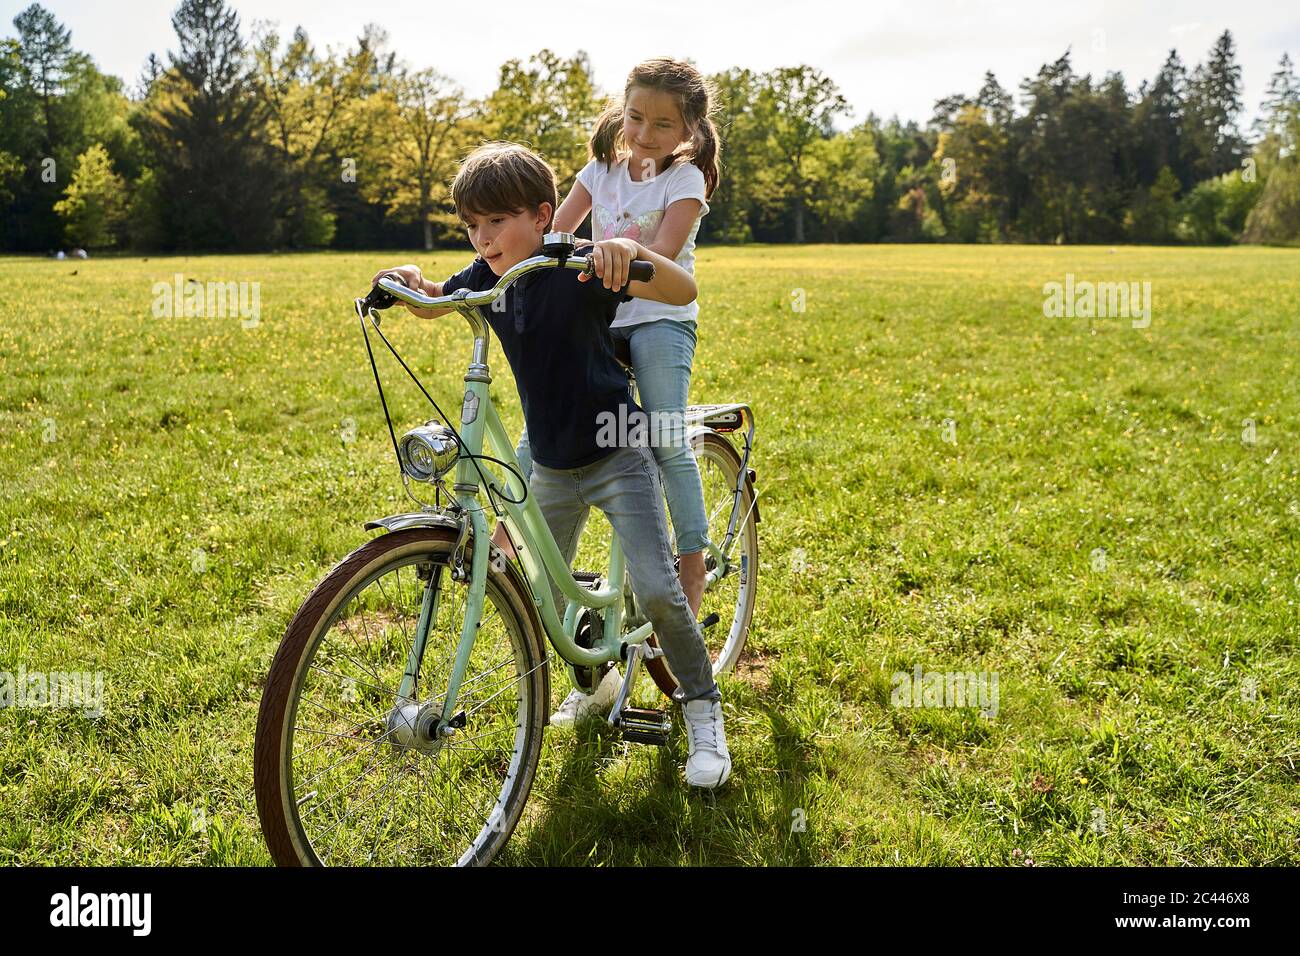 Siblings enjoying bicycle ride on grass during sunny day Stock Photo